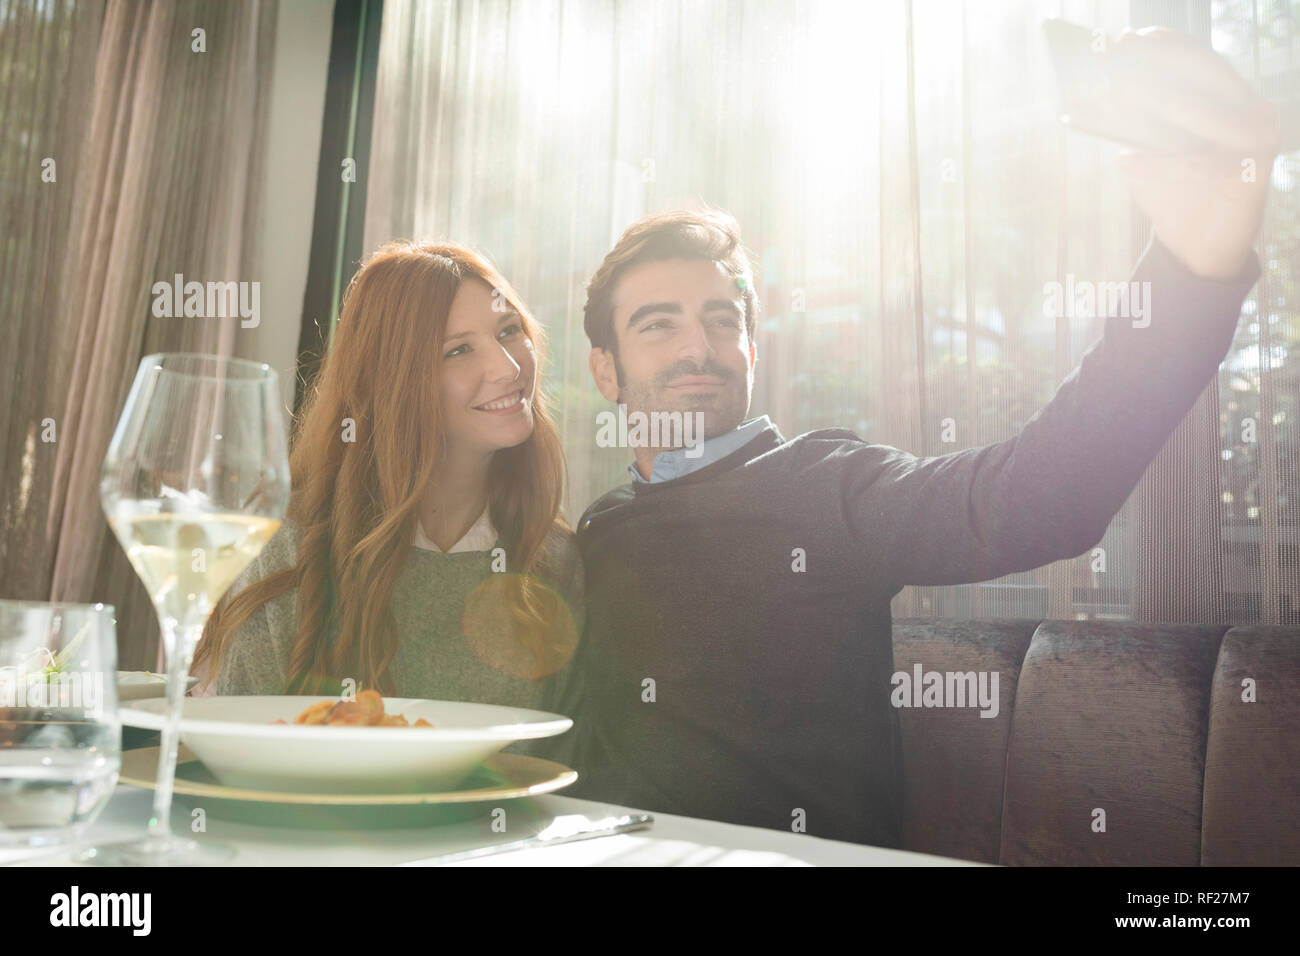 Smiling couple taking a selfie in a restaurant Stock Photo